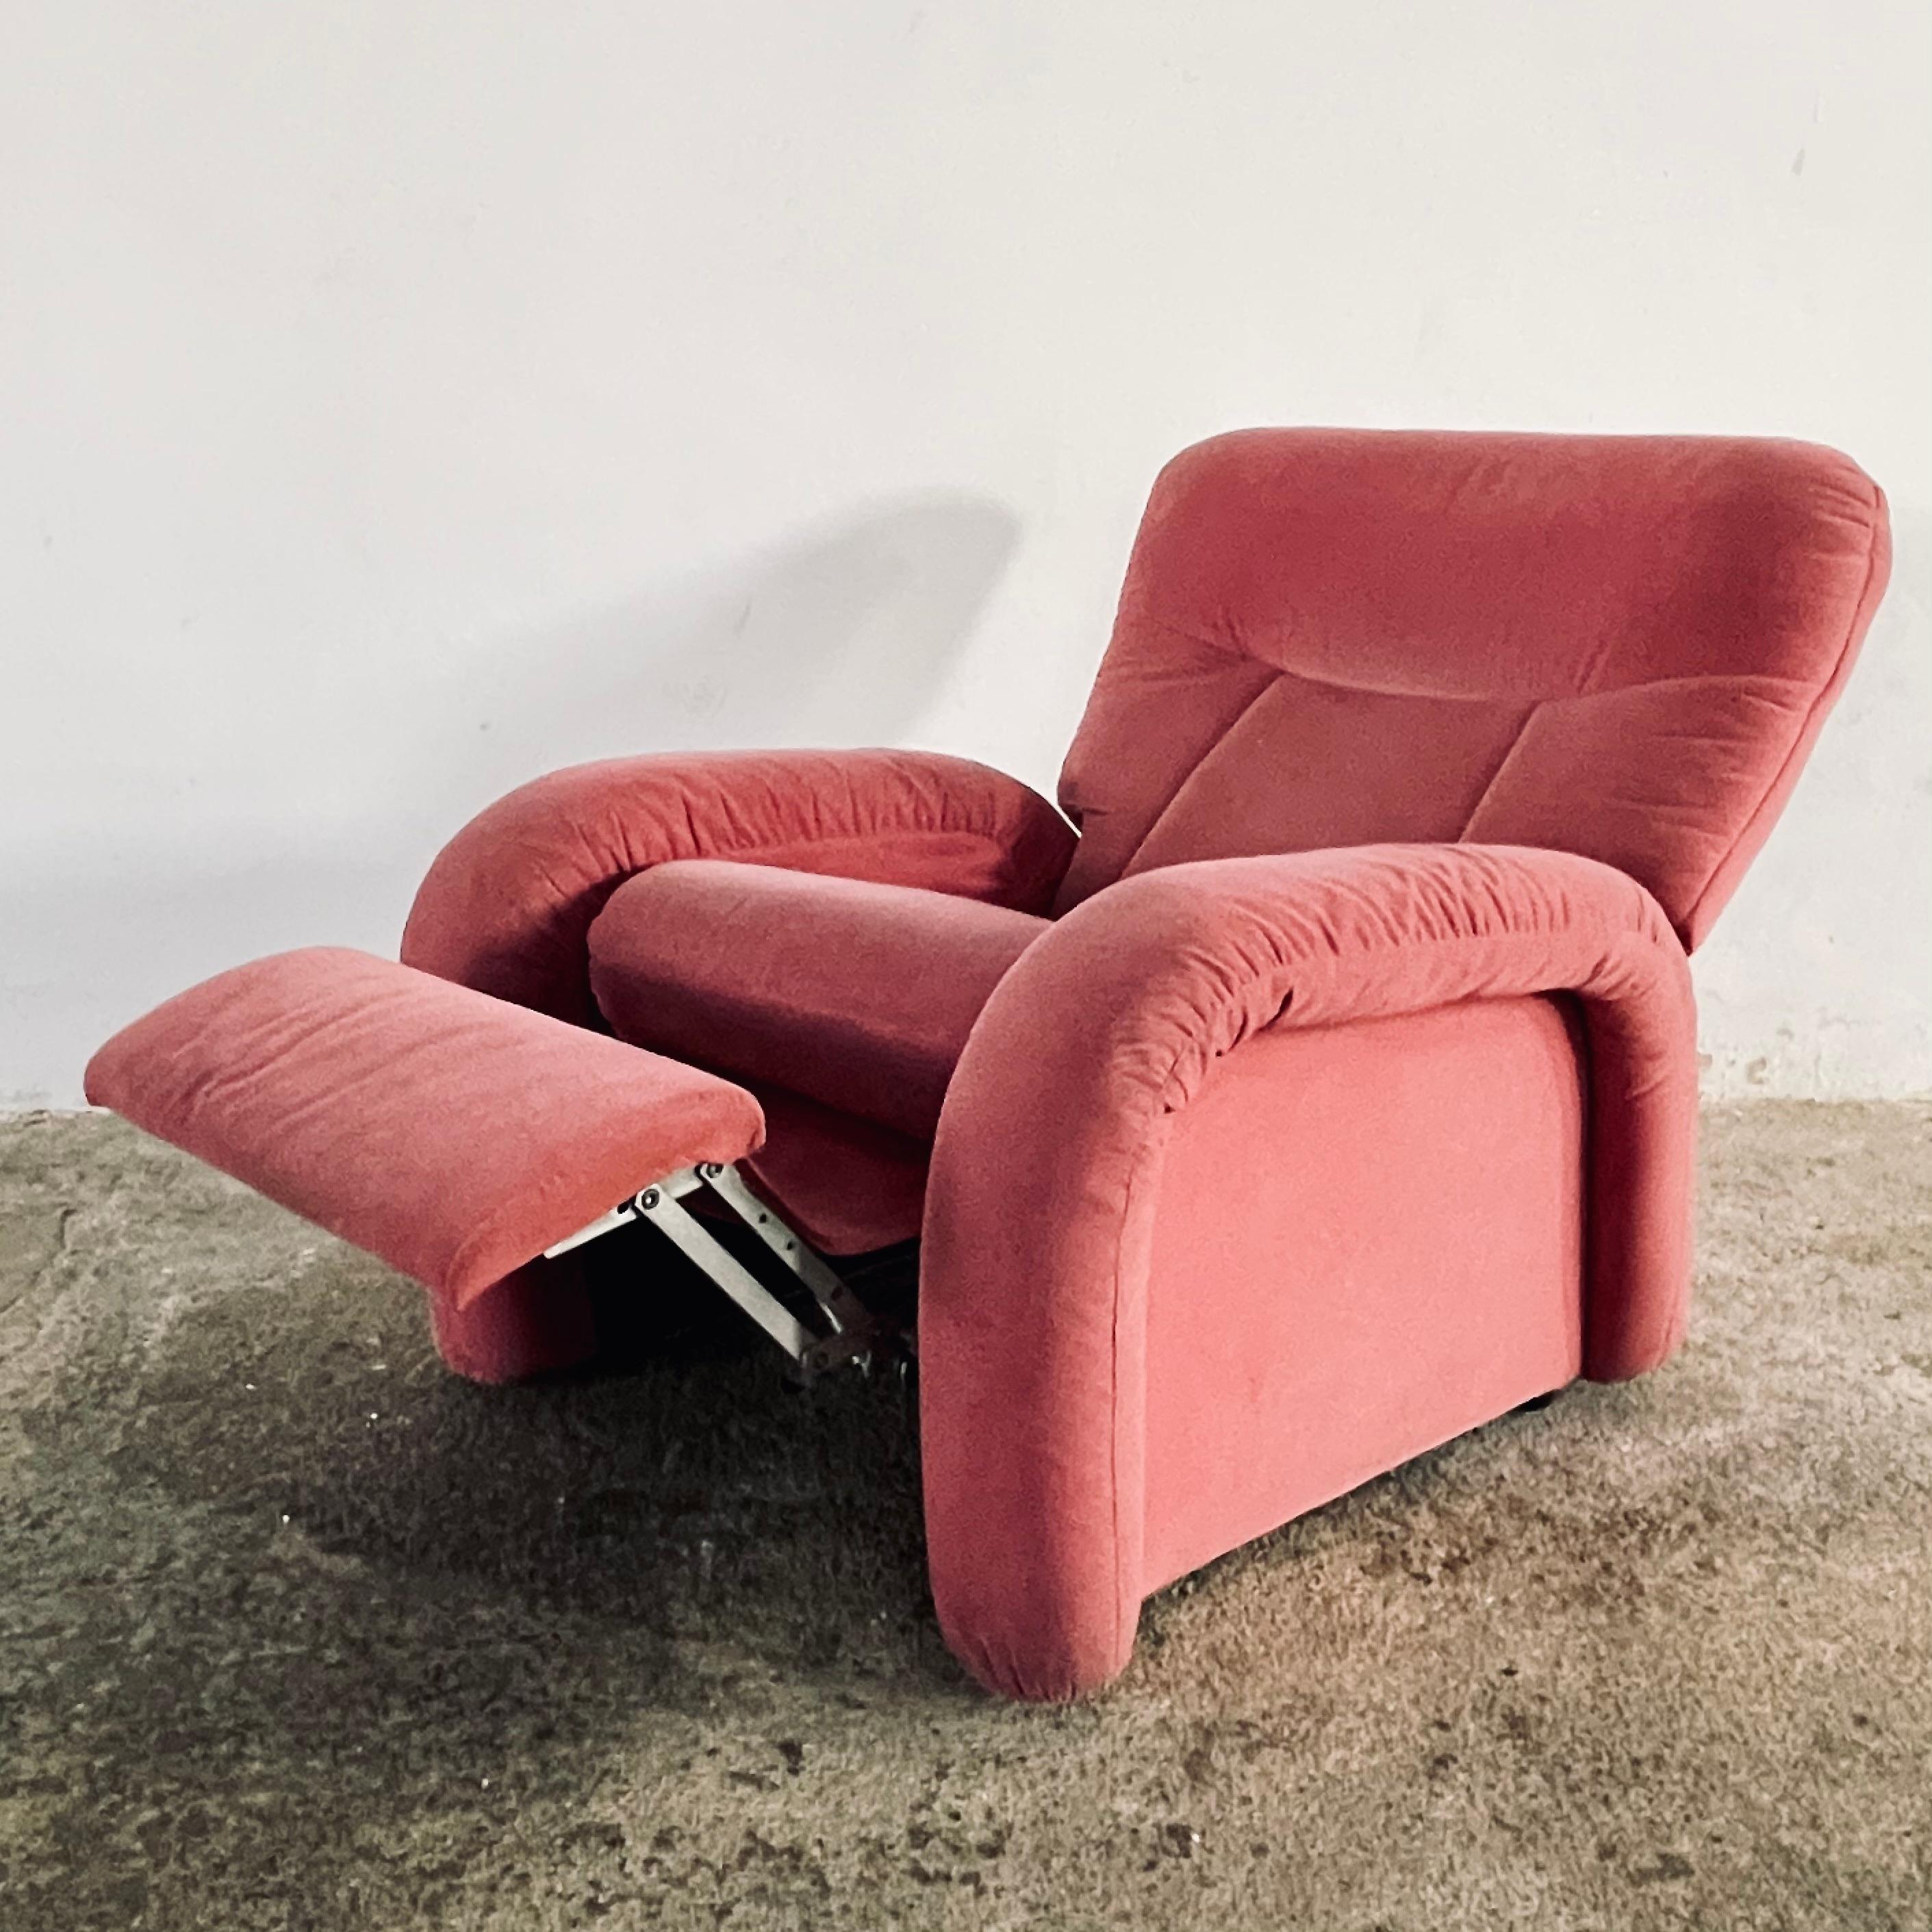 Vintage Italian Arch Reclining Lounge Chairs, Original Upholstery, Italy, 1950s For Sale 3